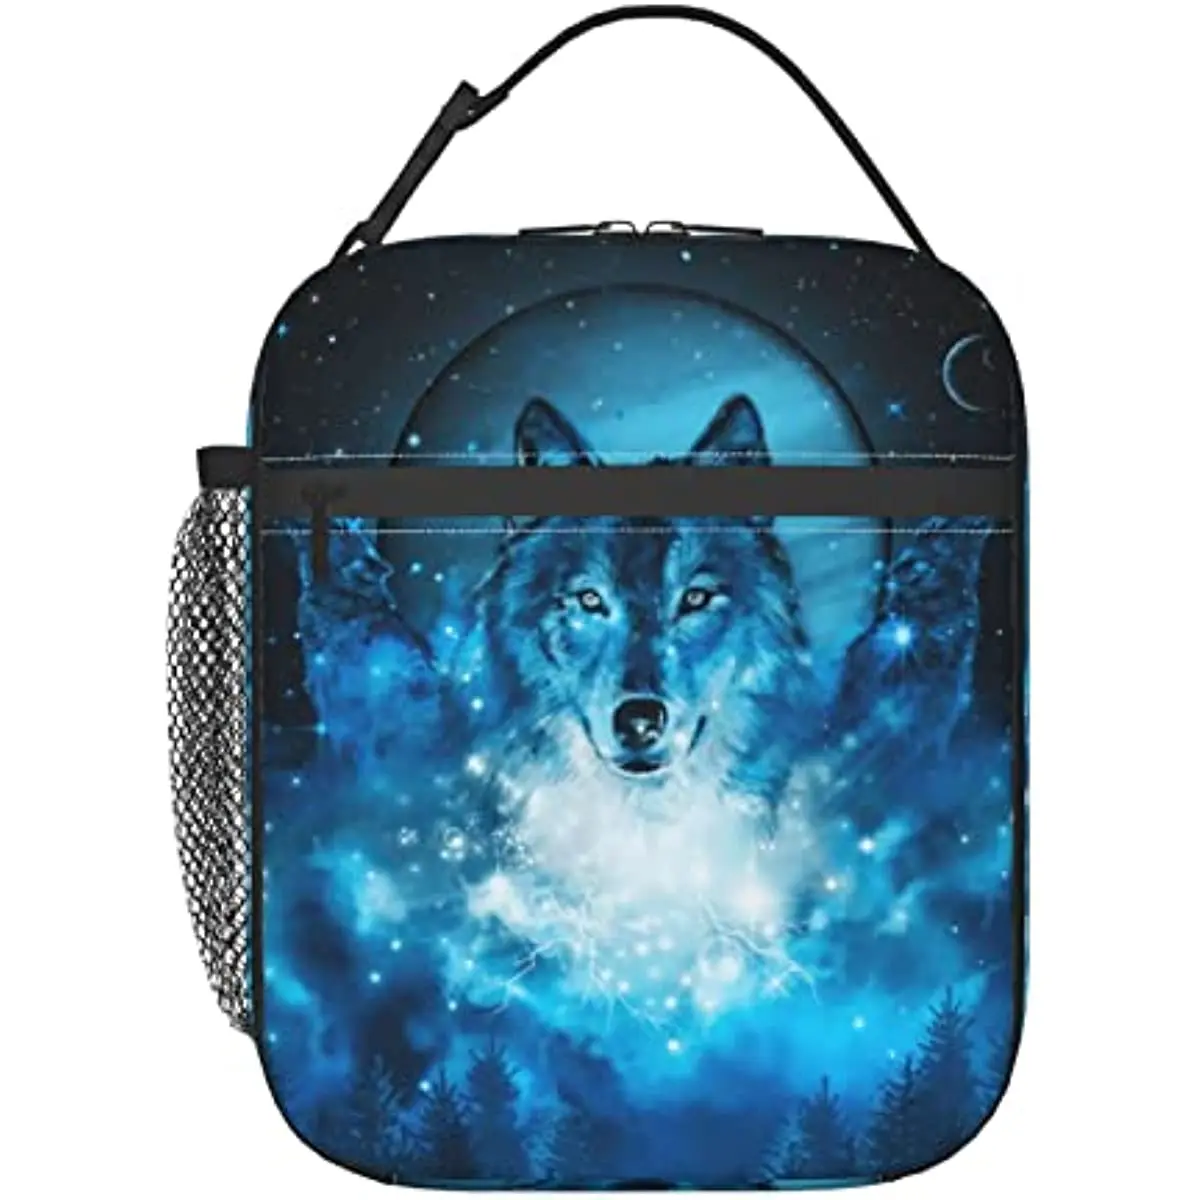 

Forest Wolf Lunch Box Insulated Food Container Meal Bag Lunch Bag For Teen Boys Girls Men Women School Work Travel Picnic